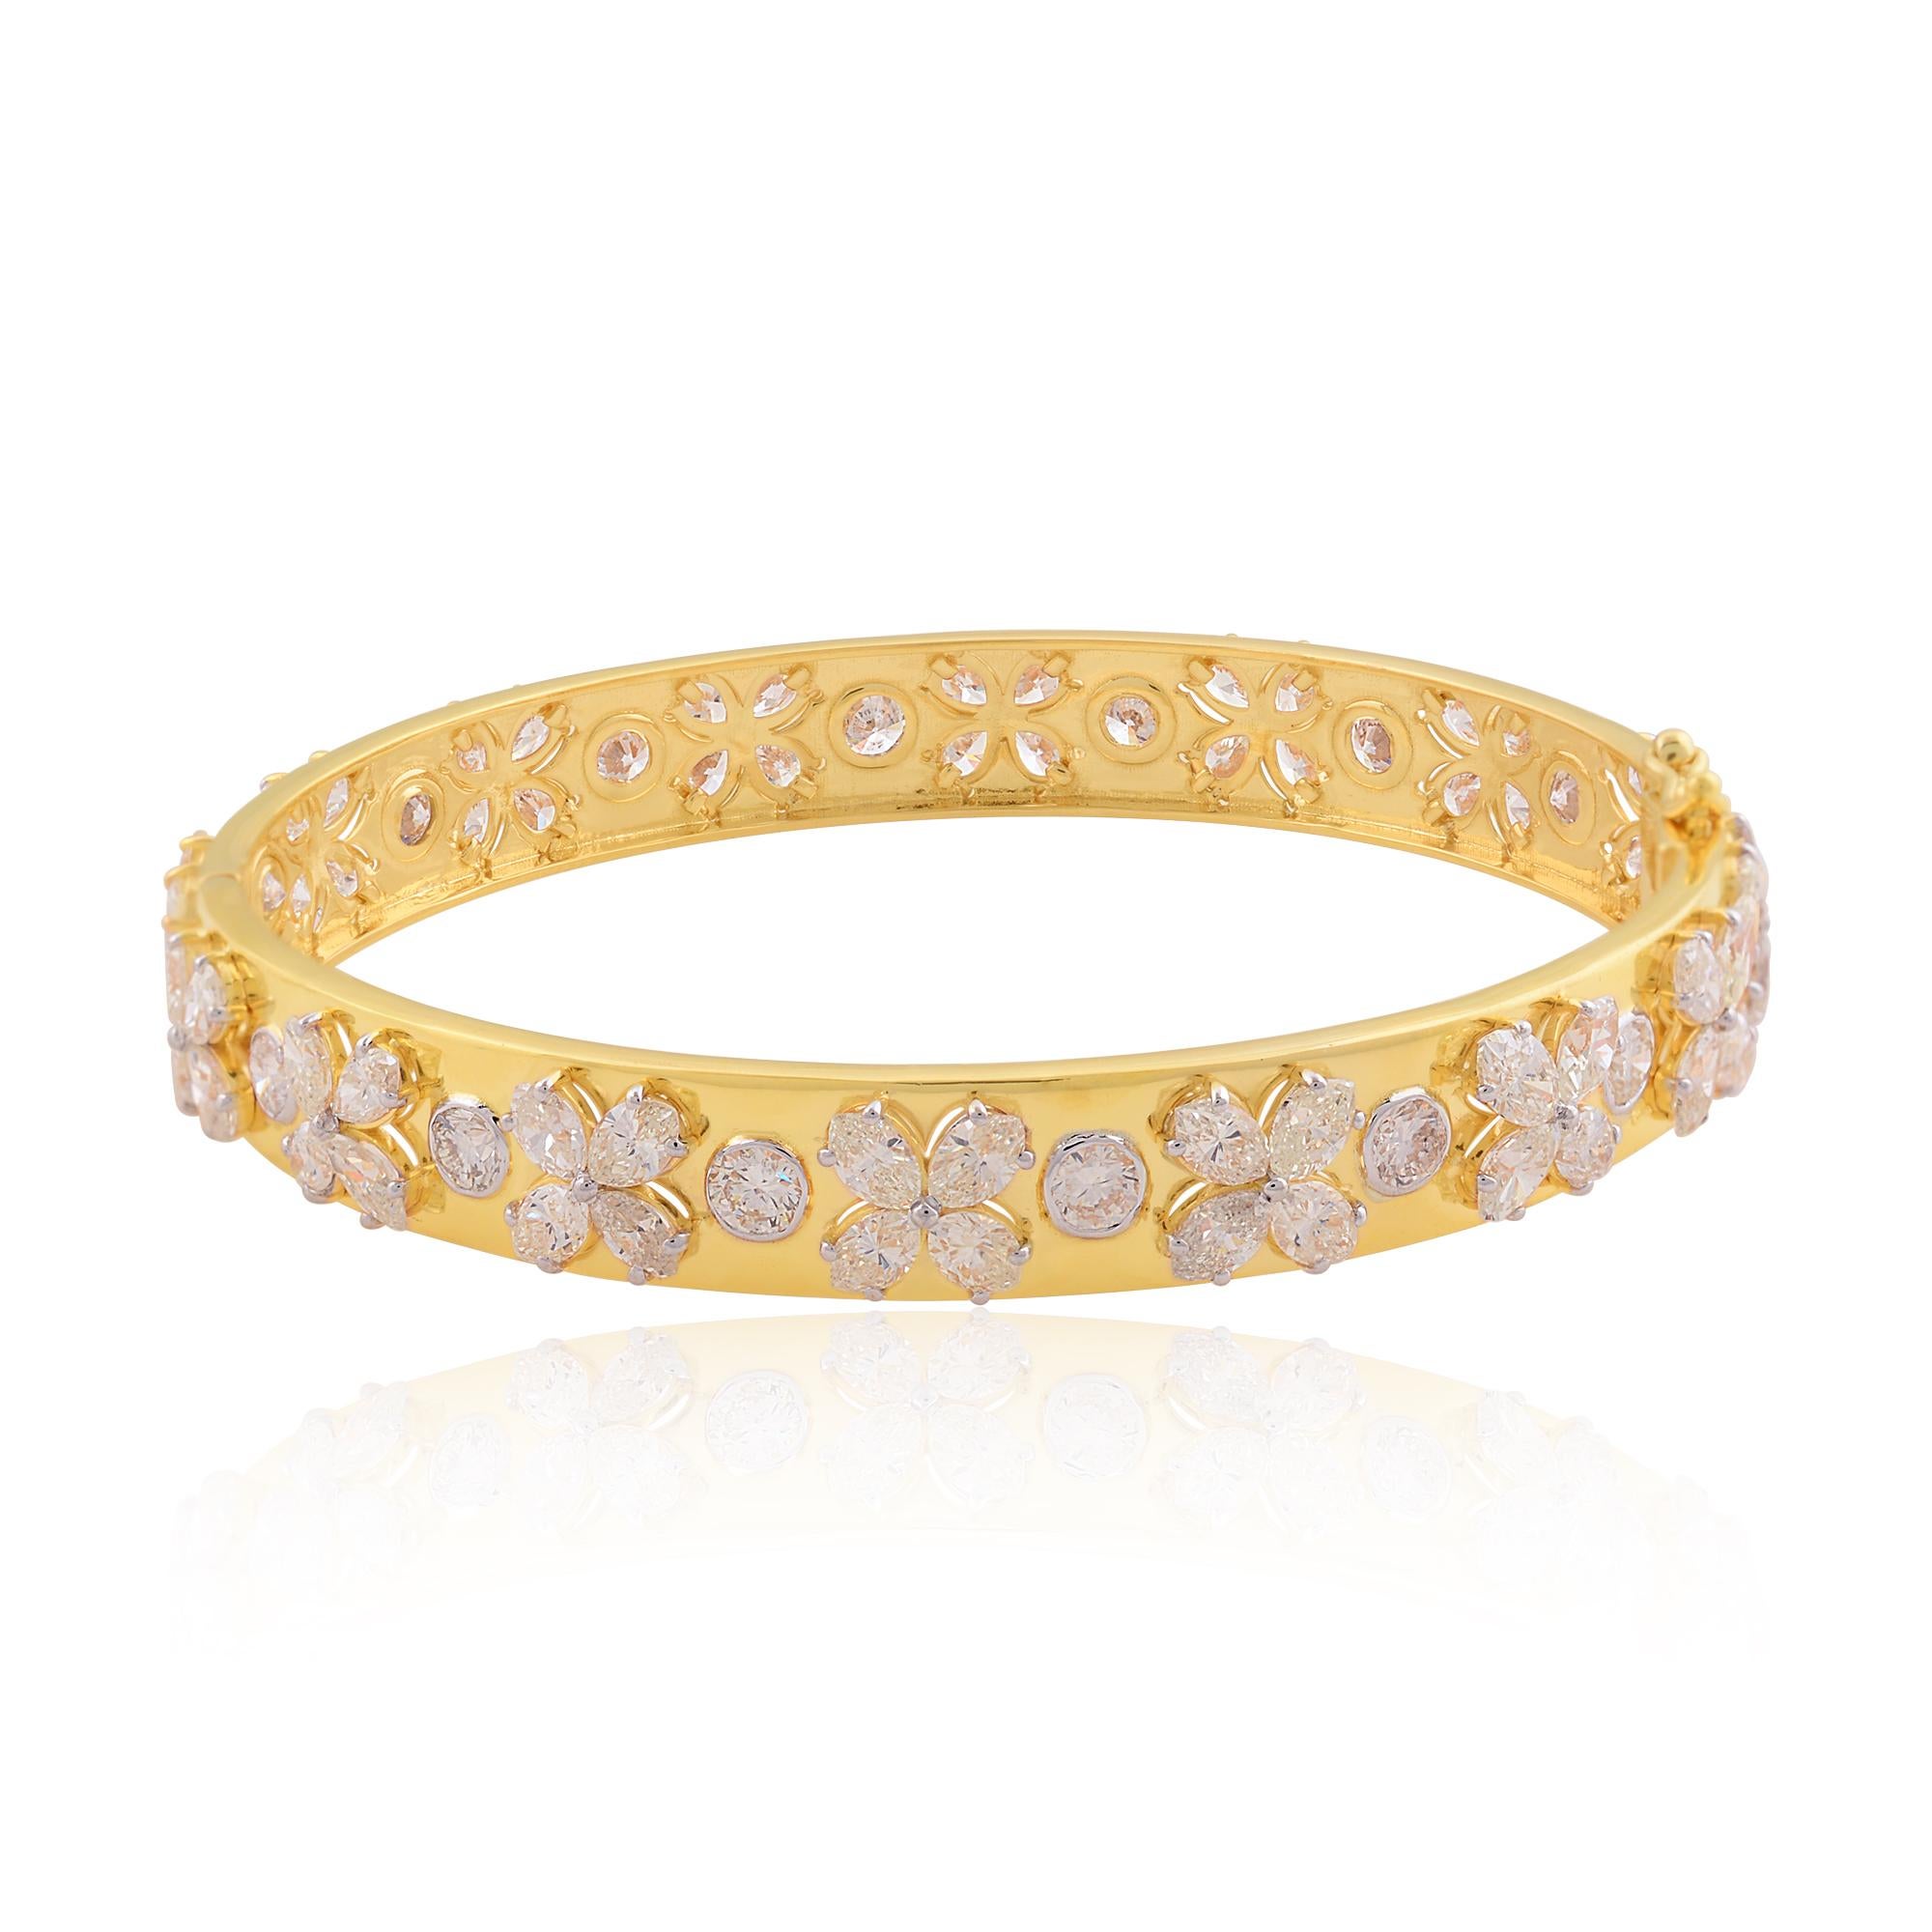 This stunning Diamond Clover Bangle is a luxurious and timeless accessory that will add a touch of elegance to any outfit. The bracelet features sparkling marquise & round diamonds set in 14k solid gold.

This is a perfect Gift for Mom, Fiancée,